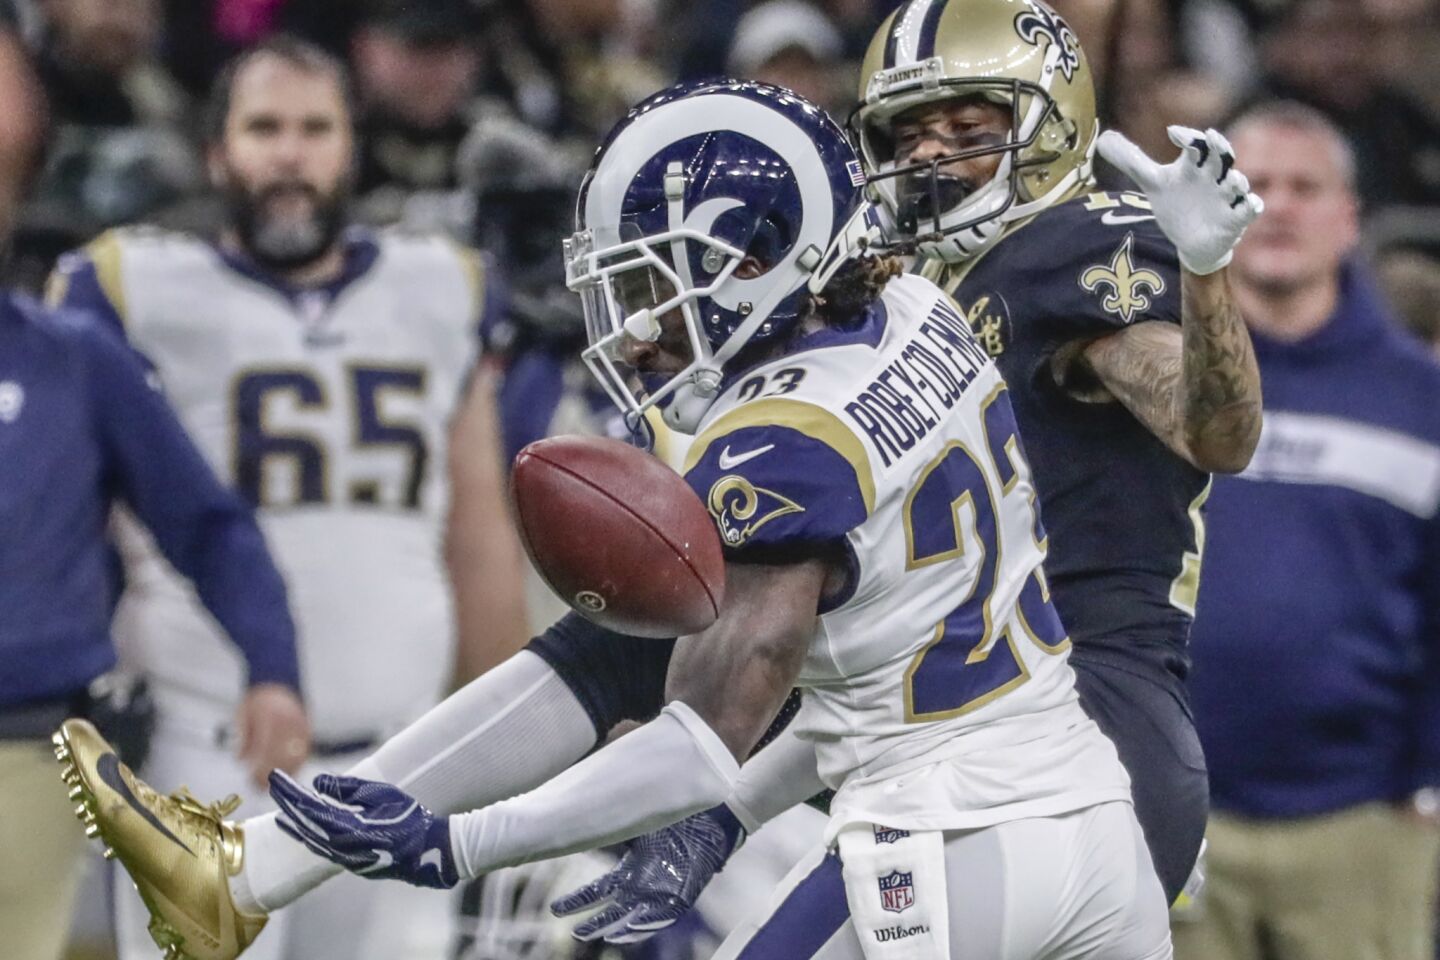 Rams cornerback Nickell Robey-Coleman knocks a pass away intended for New Orleans Saints receiver Michael Thomas during second half action in the NFC Championship at the Superdome.